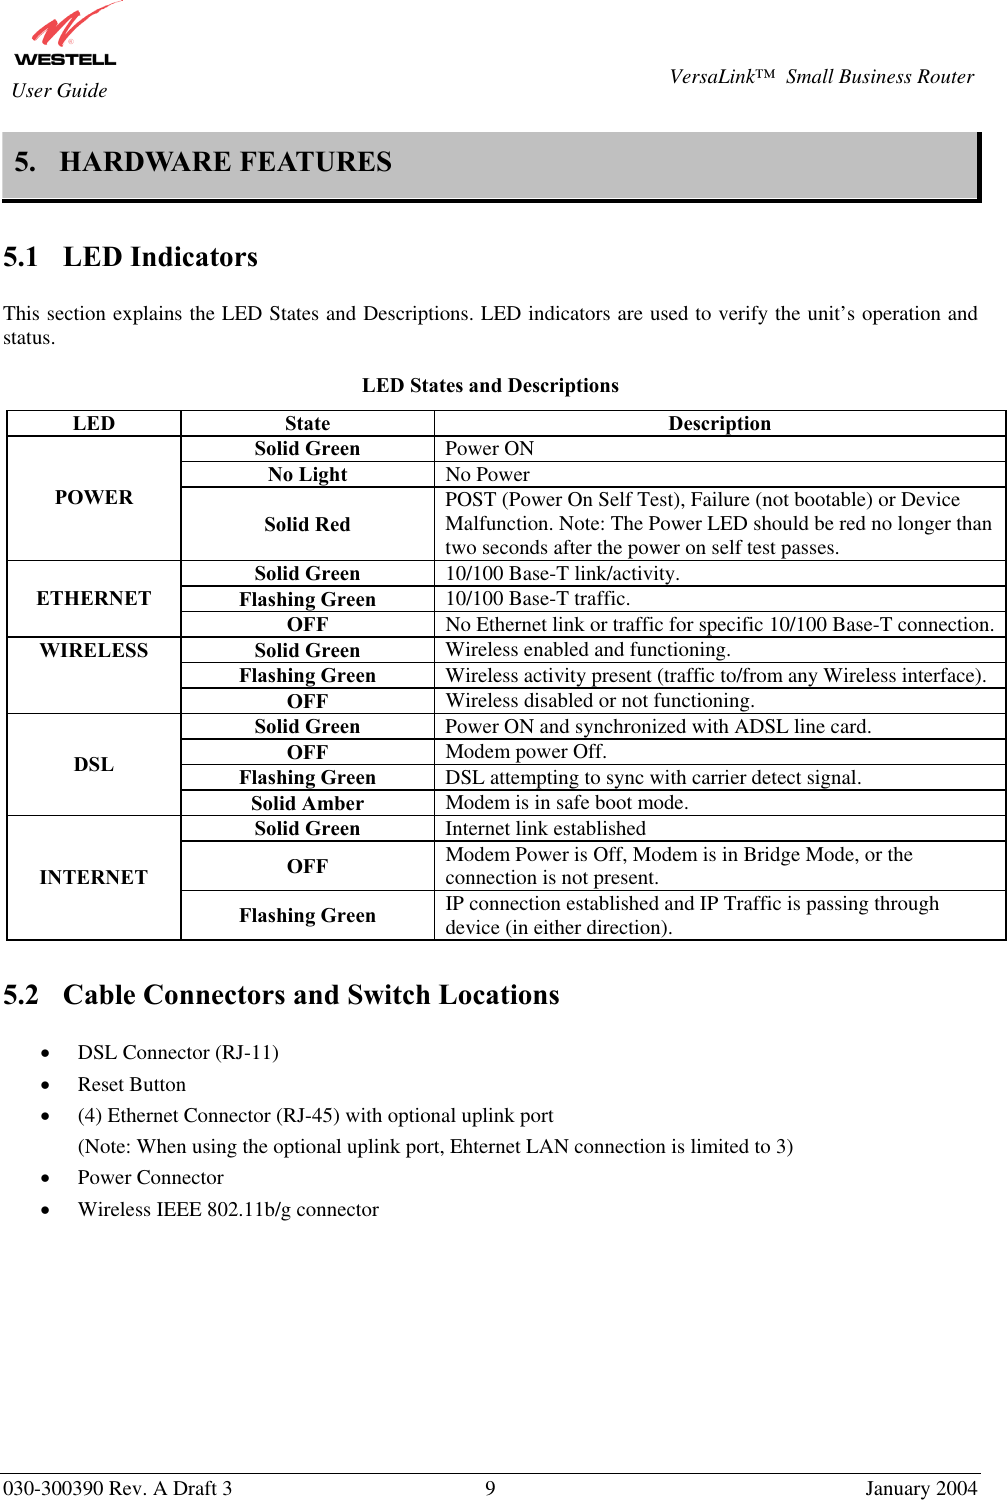       030-300390 Rev. A Draft 3  9  January 2004  VersaLink™  Small Business Router  User Guide 5. HARDWARE FEATURES  5.1 LED Indicators  This section explains the LED States and Descriptions. LED indicators are used to verify the unit’s operation and status.   LED States and Descriptions  LED State  Description Solid Green  Power ON No Light  No Power POWER Solid Red POST (Power On Self Test), Failure (not bootable) or Device Malfunction. Note: The Power LED should be red no longer than two seconds after the power on self test passes. Solid Green  10/100 Base-T link/activity. Flashing Green  10/100 Base-T traffic. ETHERNET OFF  No Ethernet link or traffic for specific 10/100 Base-T connection. Solid Green  Wireless enabled and functioning. Flashing Green  Wireless activity present (traffic to/from any Wireless interface). WIRELESS OFF  Wireless disabled or not functioning. Solid Green  Power ON and synchronized with ADSL line card. OFF  Modem power Off. Flashing Green  DSL attempting to sync with carrier detect signal. DSL Solid Amber  Modem is in safe boot mode. Solid Green  Internet link established OFF  Modem Power is Off, Modem is in Bridge Mode, or the connection is not present. INTERNET Flashing Green  IP connection established and IP Traffic is passing through device (in either direction).  5.2  Cable Connectors and Switch Locations  •  DSL Connector (RJ-11) •  Reset Button •  (4) Ethernet Connector (RJ-45) with optional uplink port (Note: When using the optional uplink port, Ehternet LAN connection is limited to 3) •  Power Connector •  Wireless IEEE 802.11b/g connector           